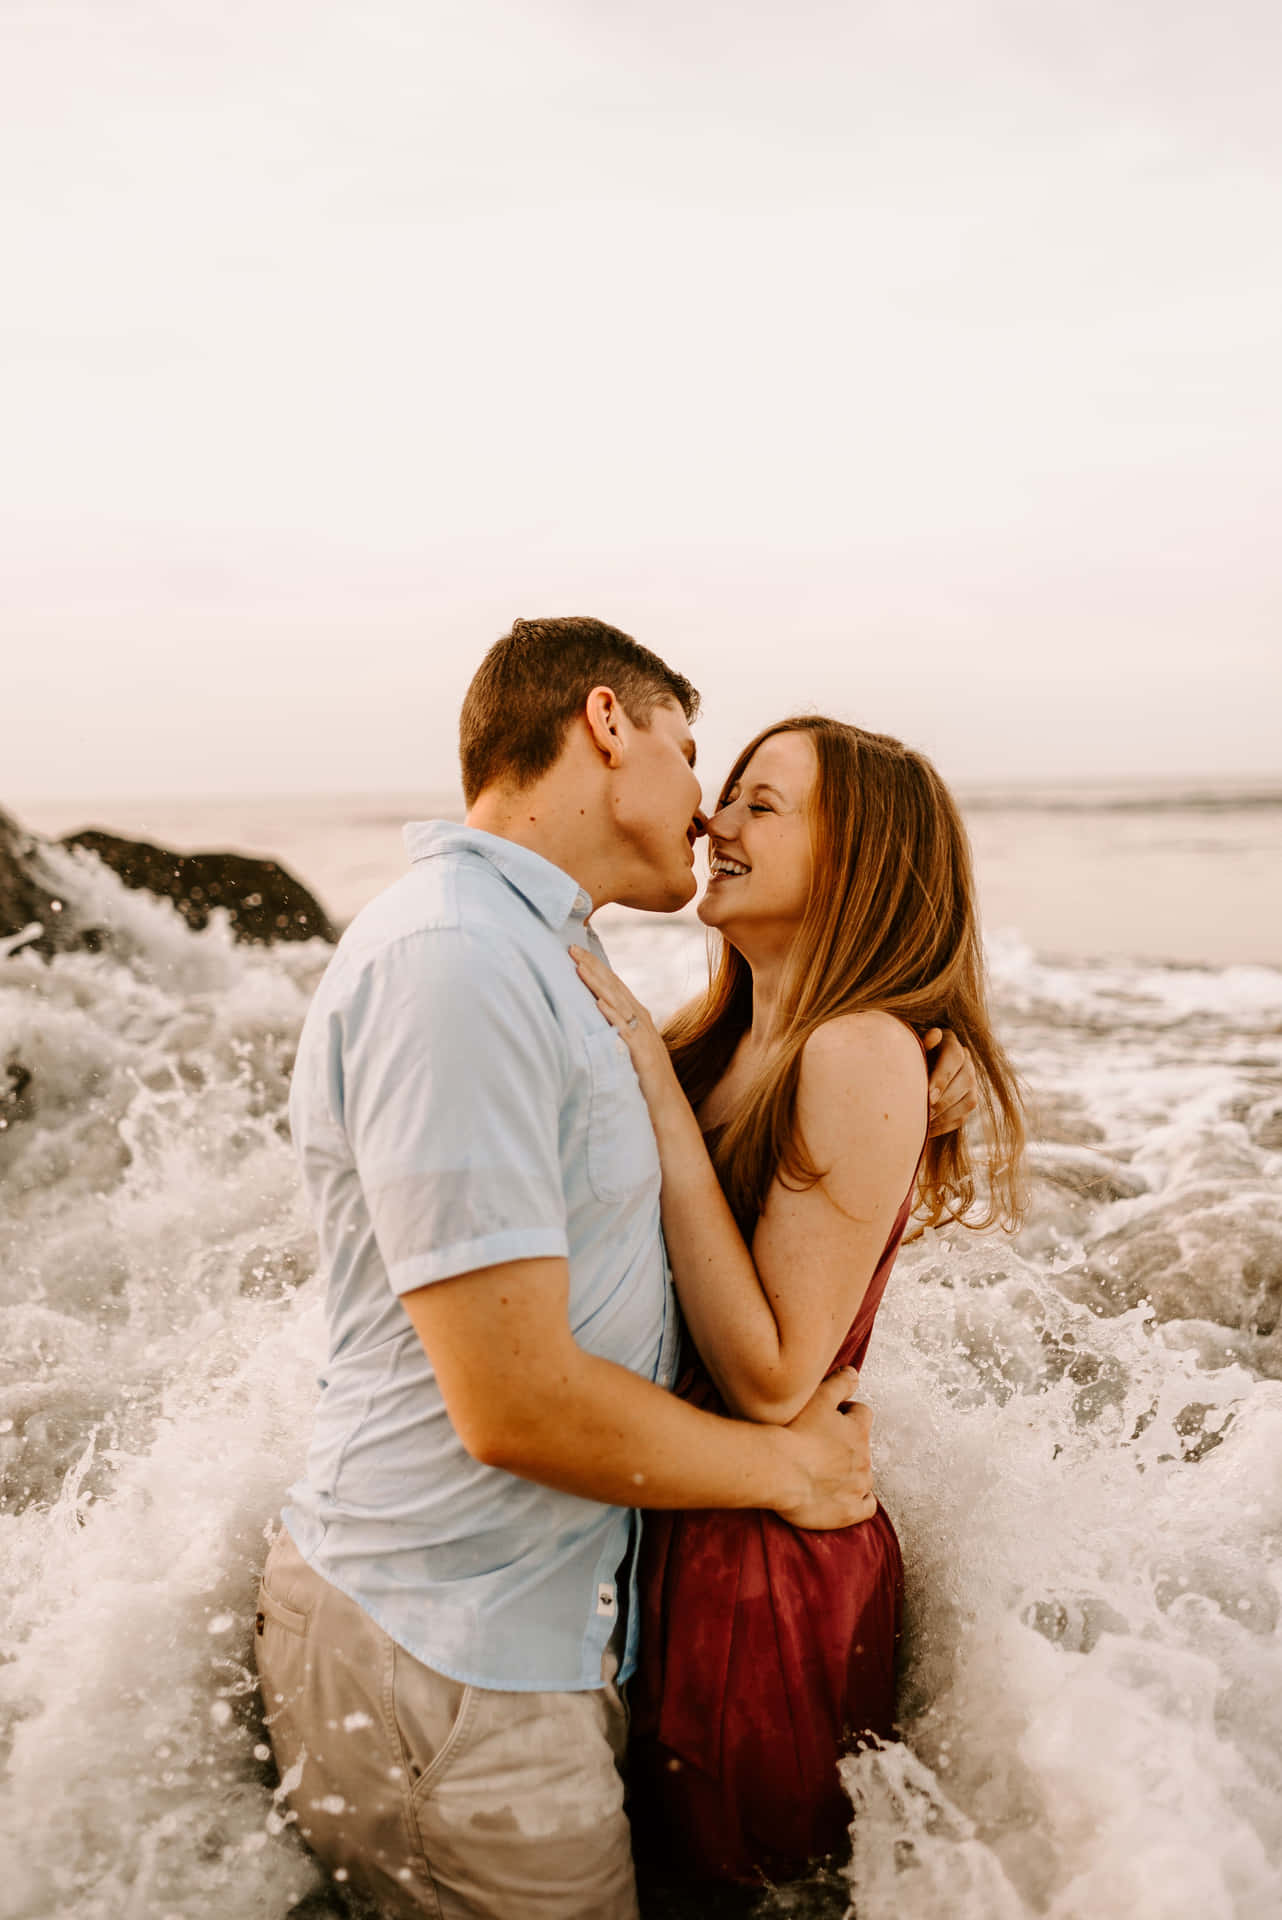 Couple At Beach Waves Crashing While Kissing Picture